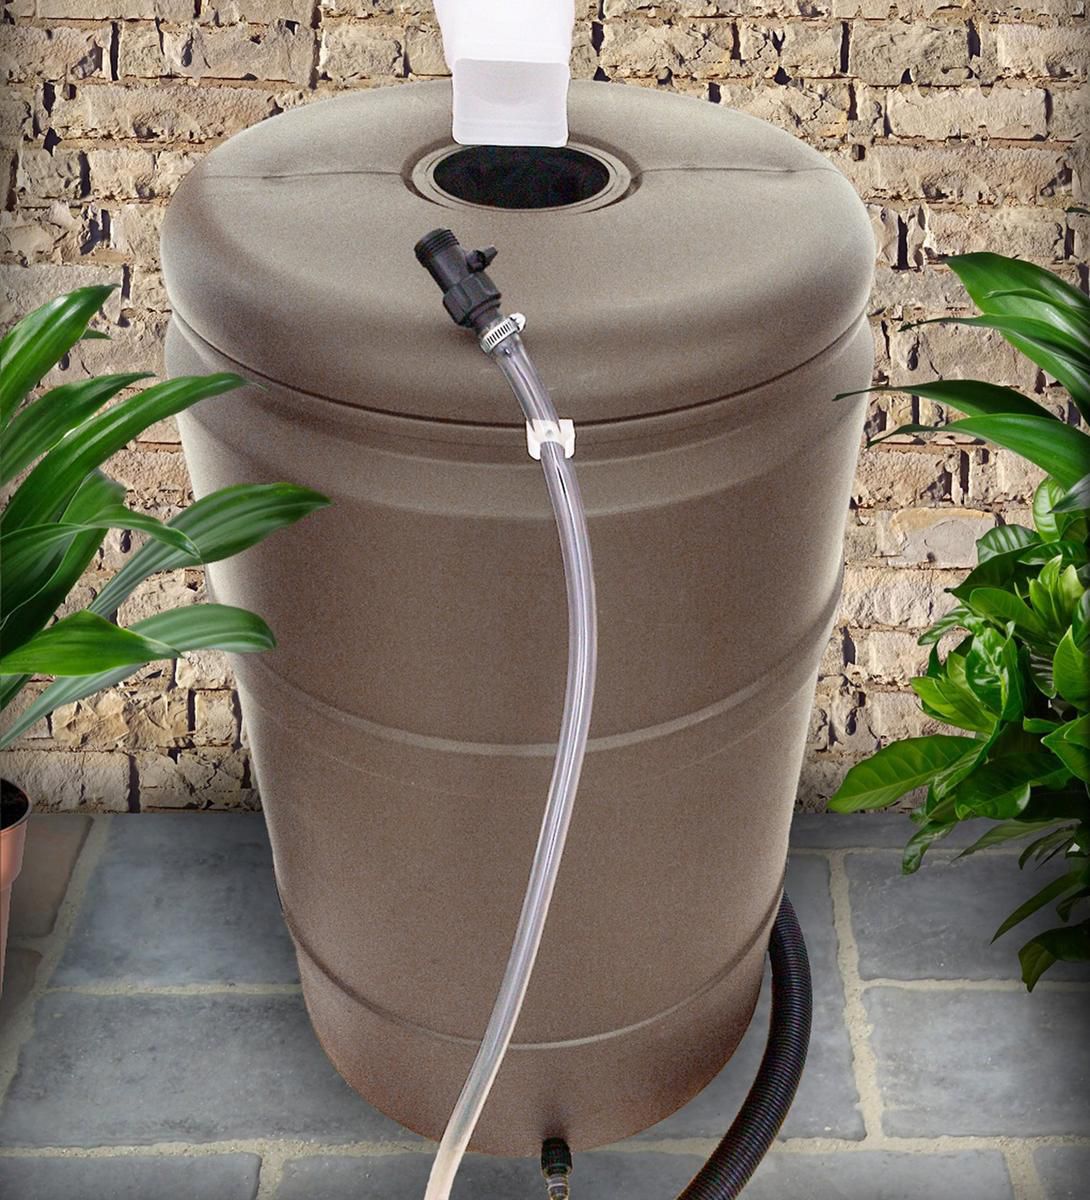 Try a rain barrel, Random Acts of Green encourages